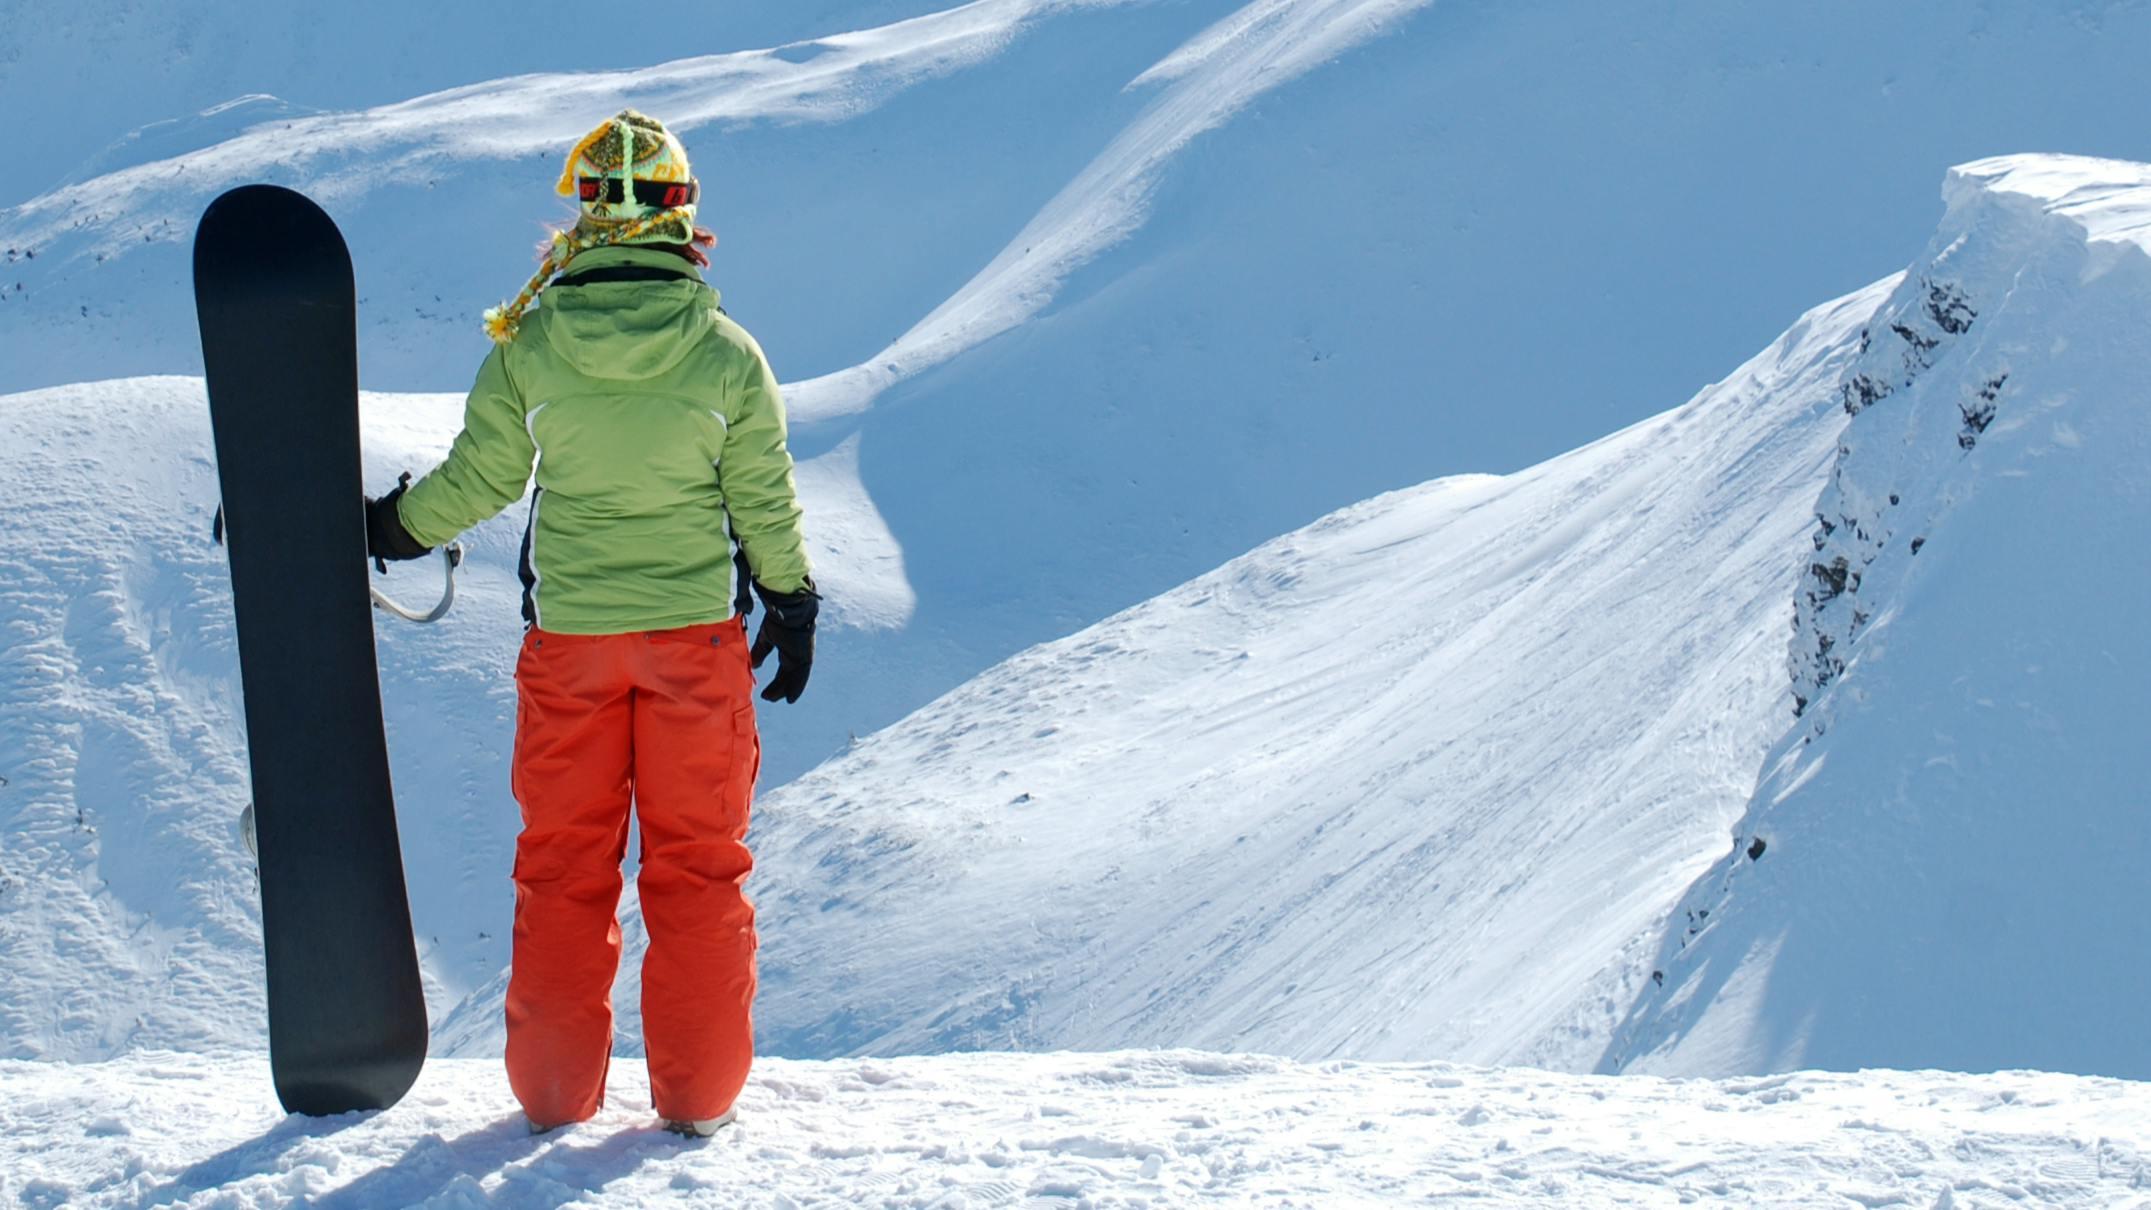 A woman with a snowboard stands at the top of a snowy mountain. Her back is facing the camera and she has a green jacket and red pants on. 